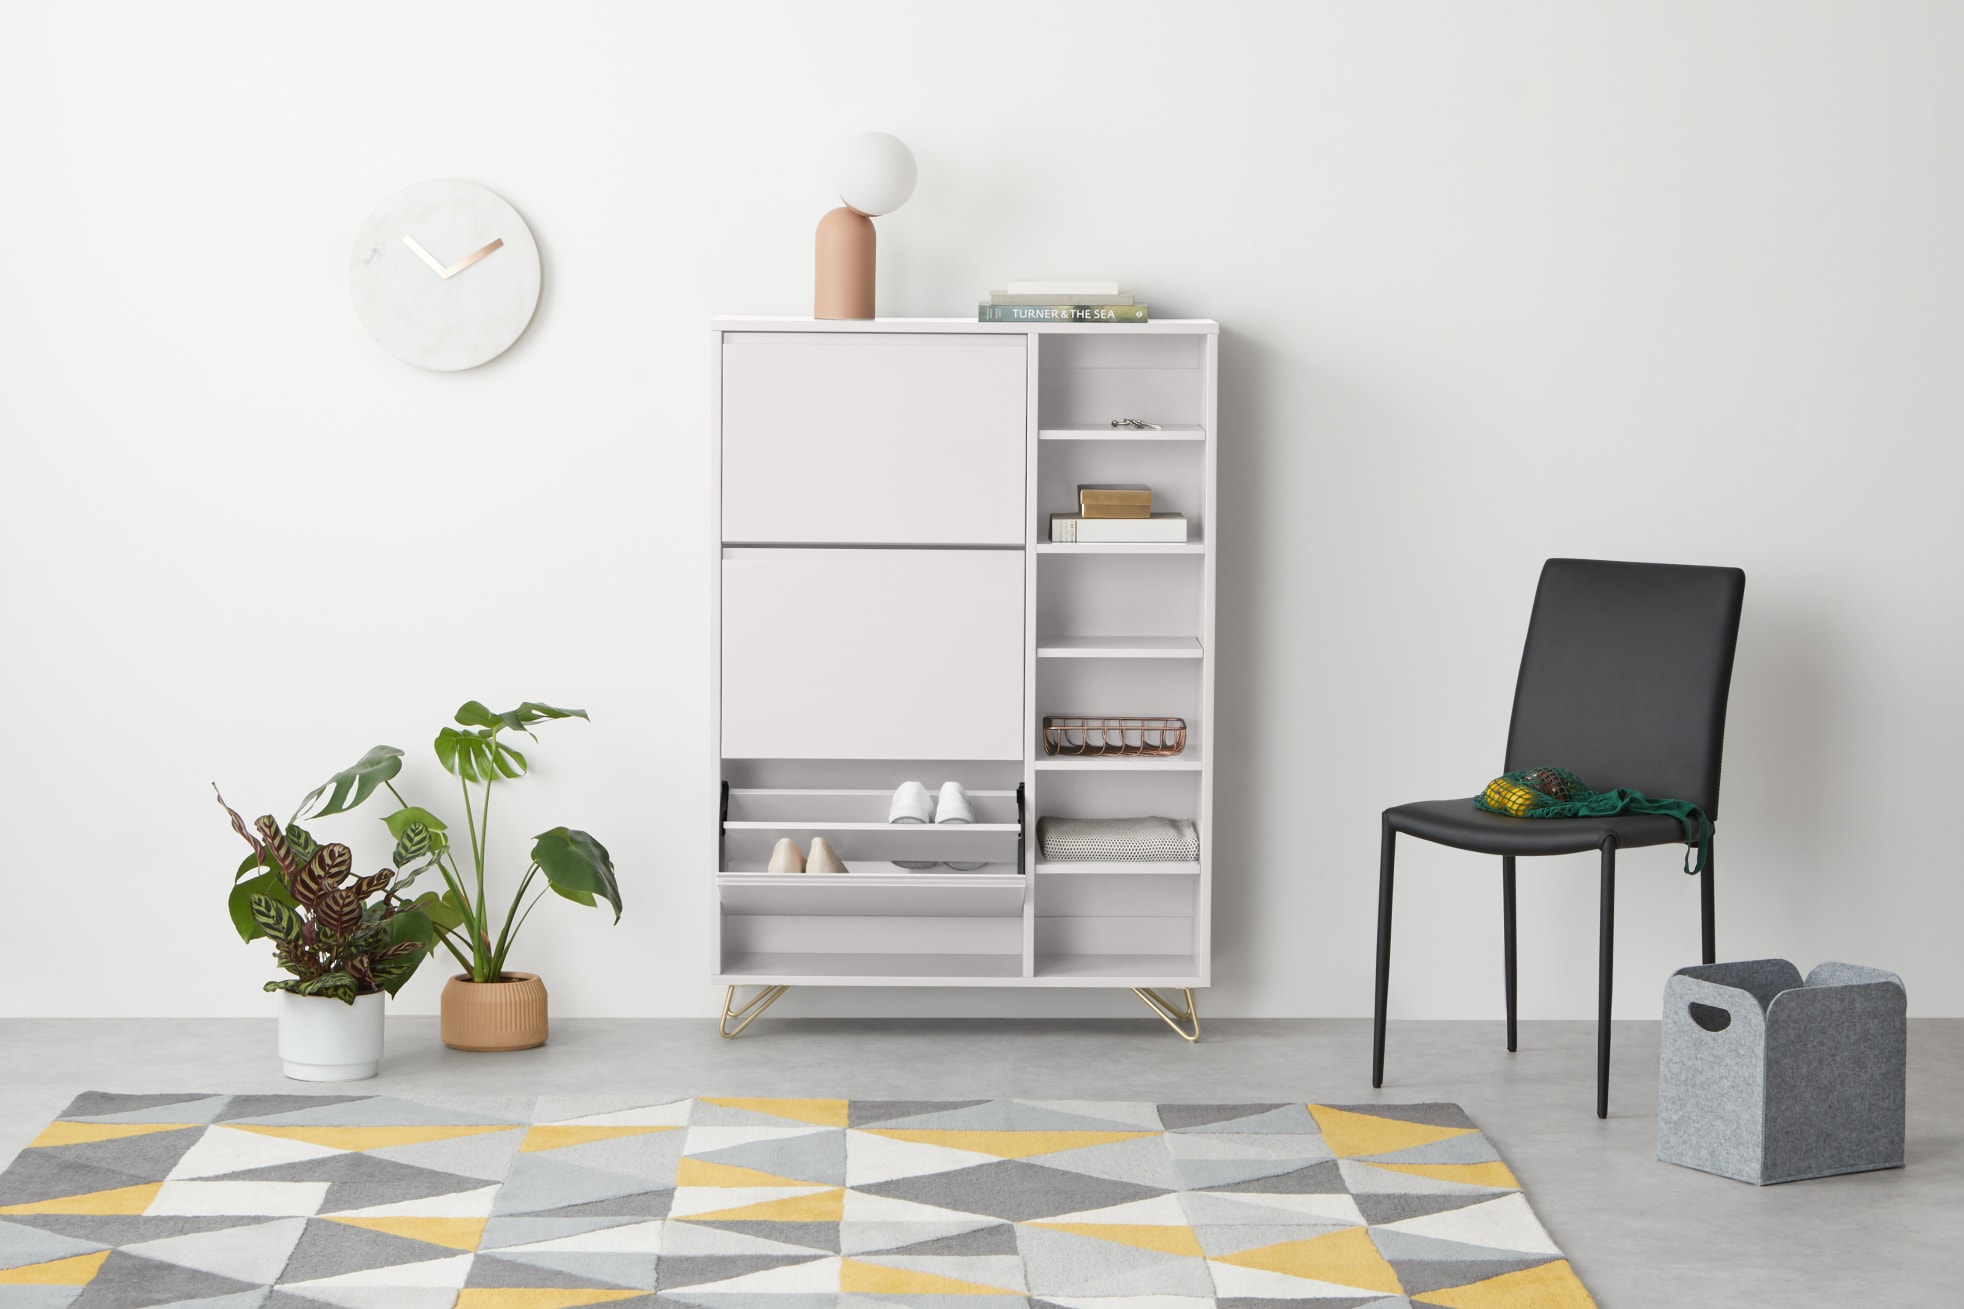 https://www.home-designing.com/wp-content/uploads/2021/09/minimalist-white-shoe-cabinet-slim-streamlined-organization-options-for-entryway-living-room-storage-furniture-gold-hairpin-legs.jpg